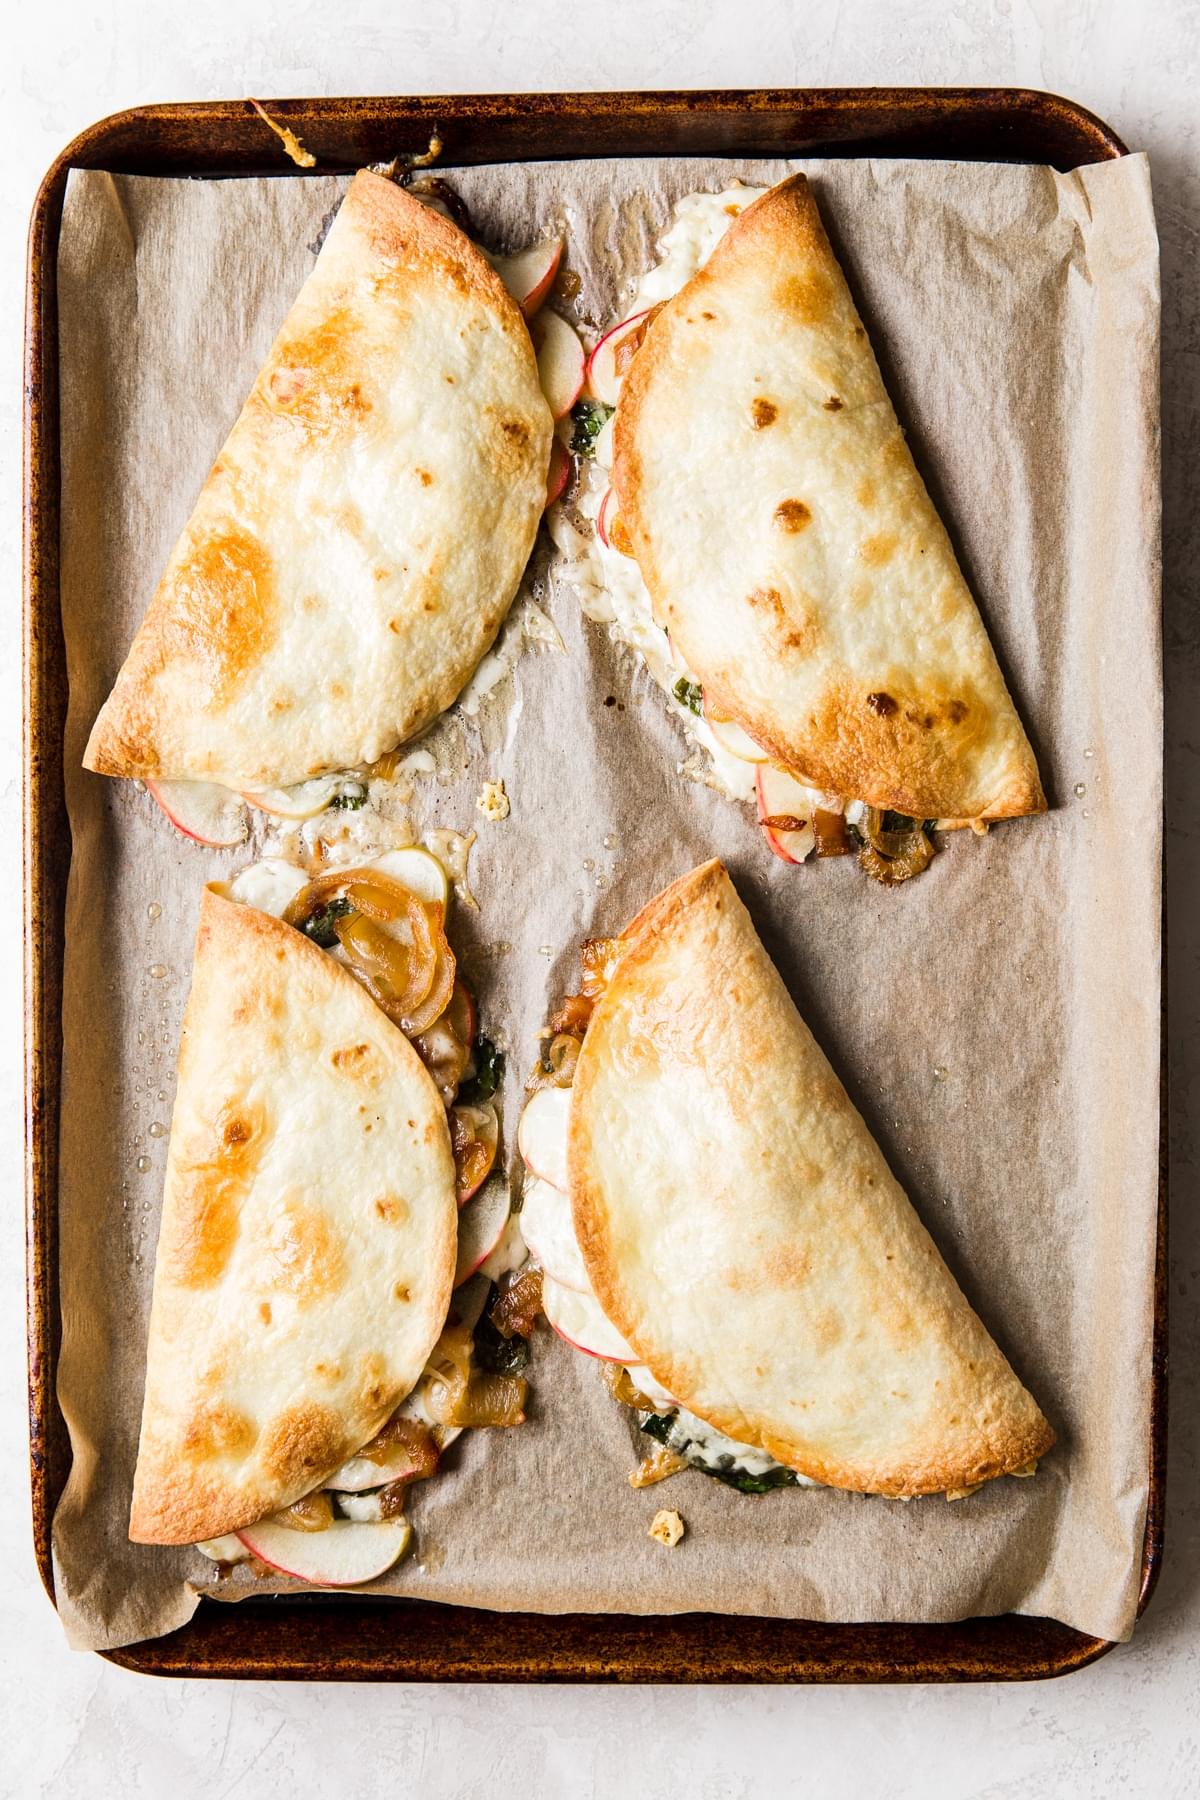 Apple And Caramelized Onion Baked Quesadilla 10